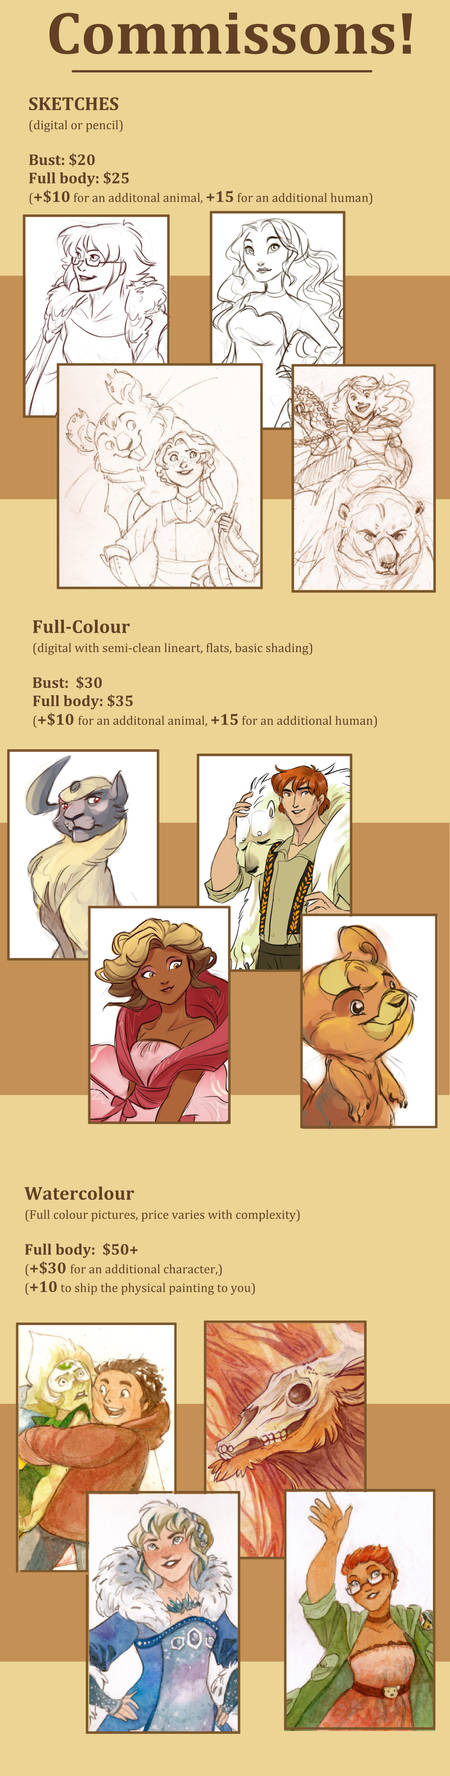 Commissions Information